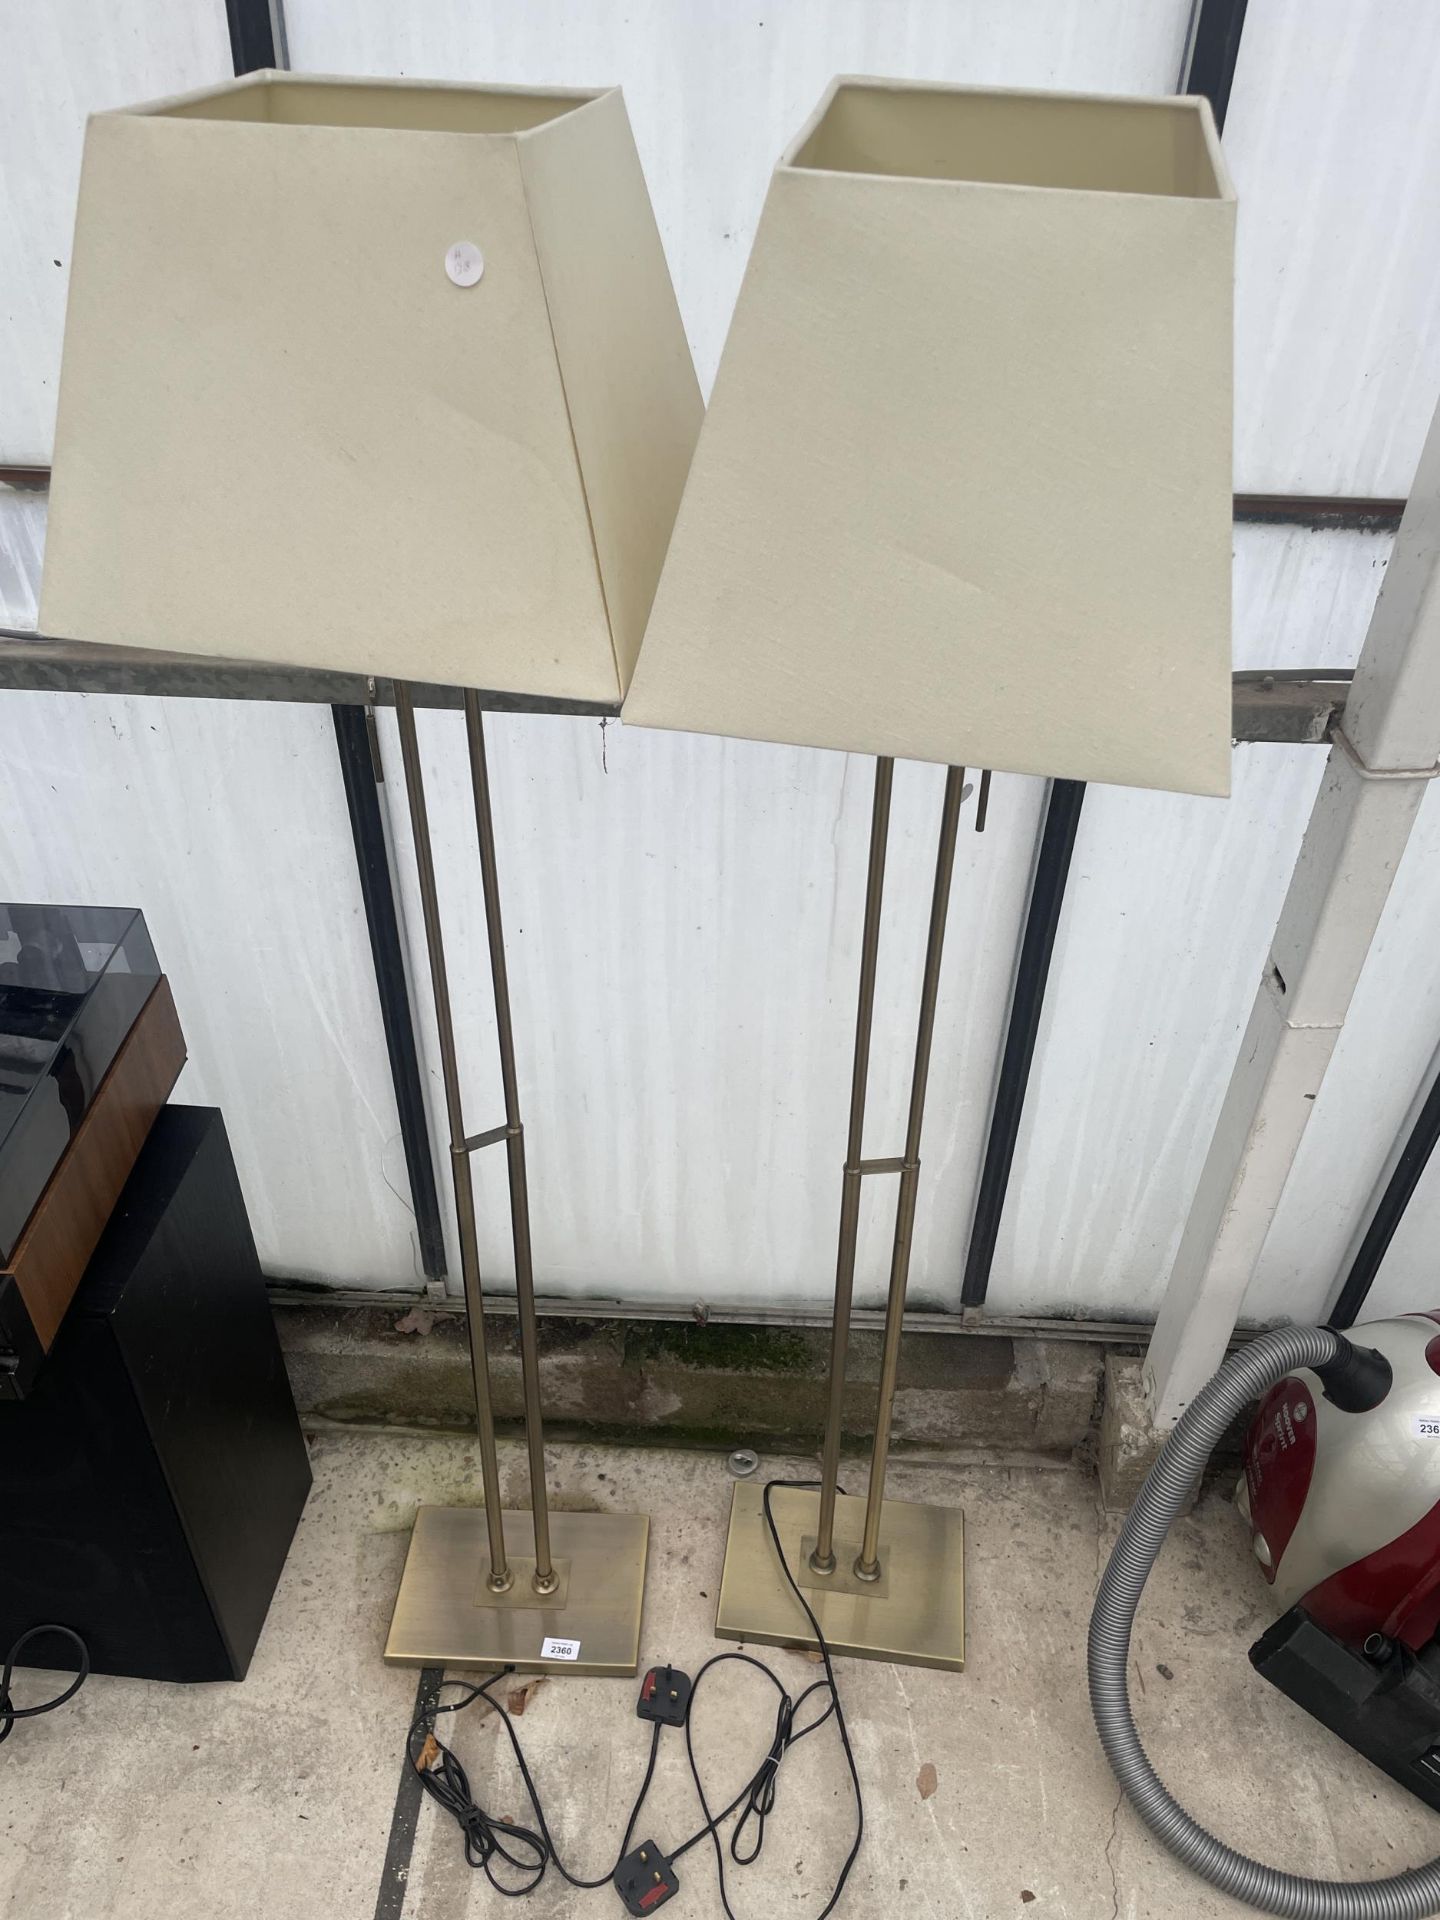 A PAIR OF DECORATIVE METAL STANDARD LAMPS WITH SHADES